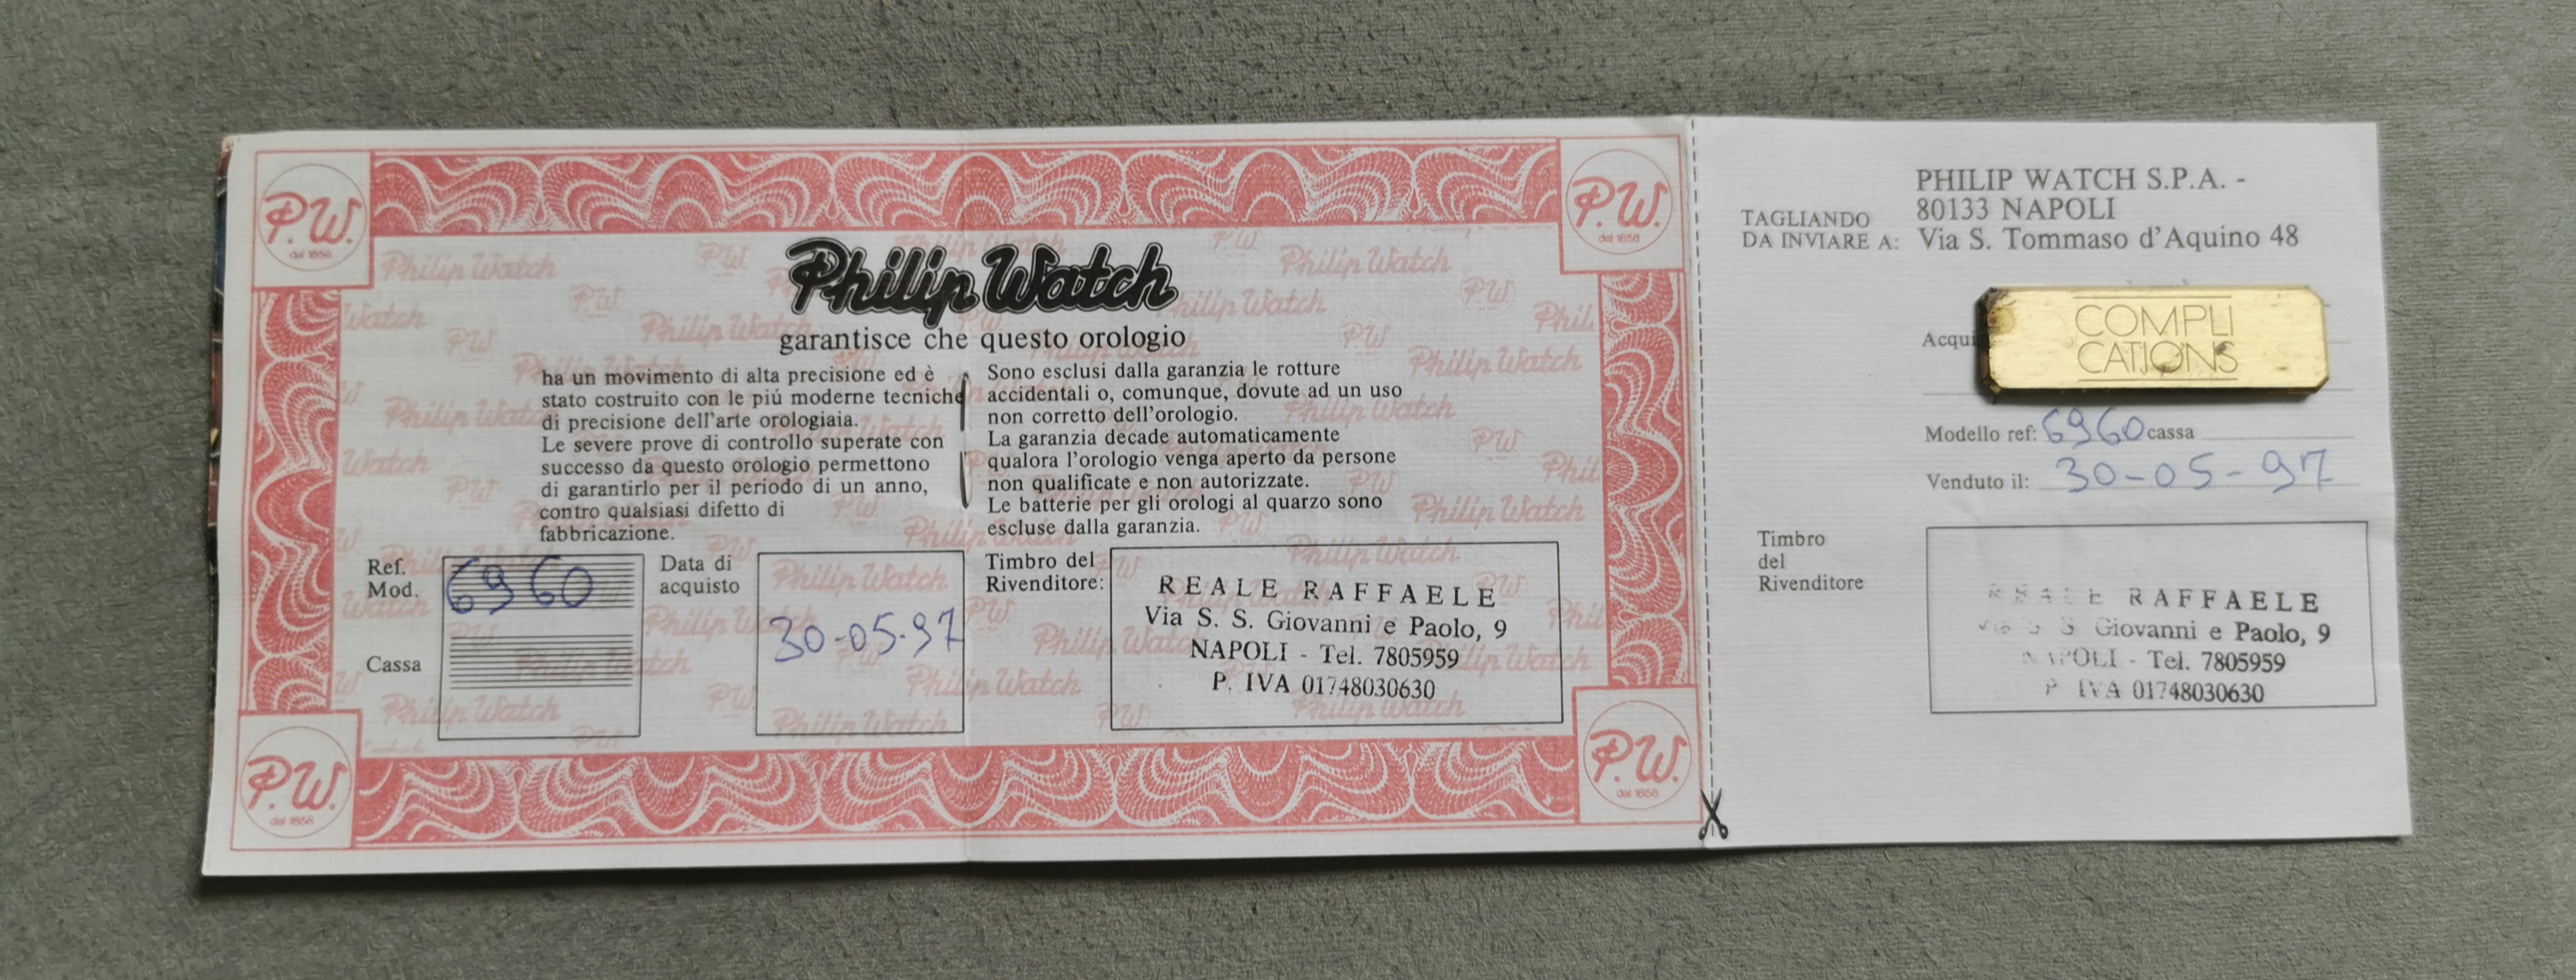 Philip Watch vintage warranty booklet paper signed and stamped 1997 | San Giorgio a Cremano